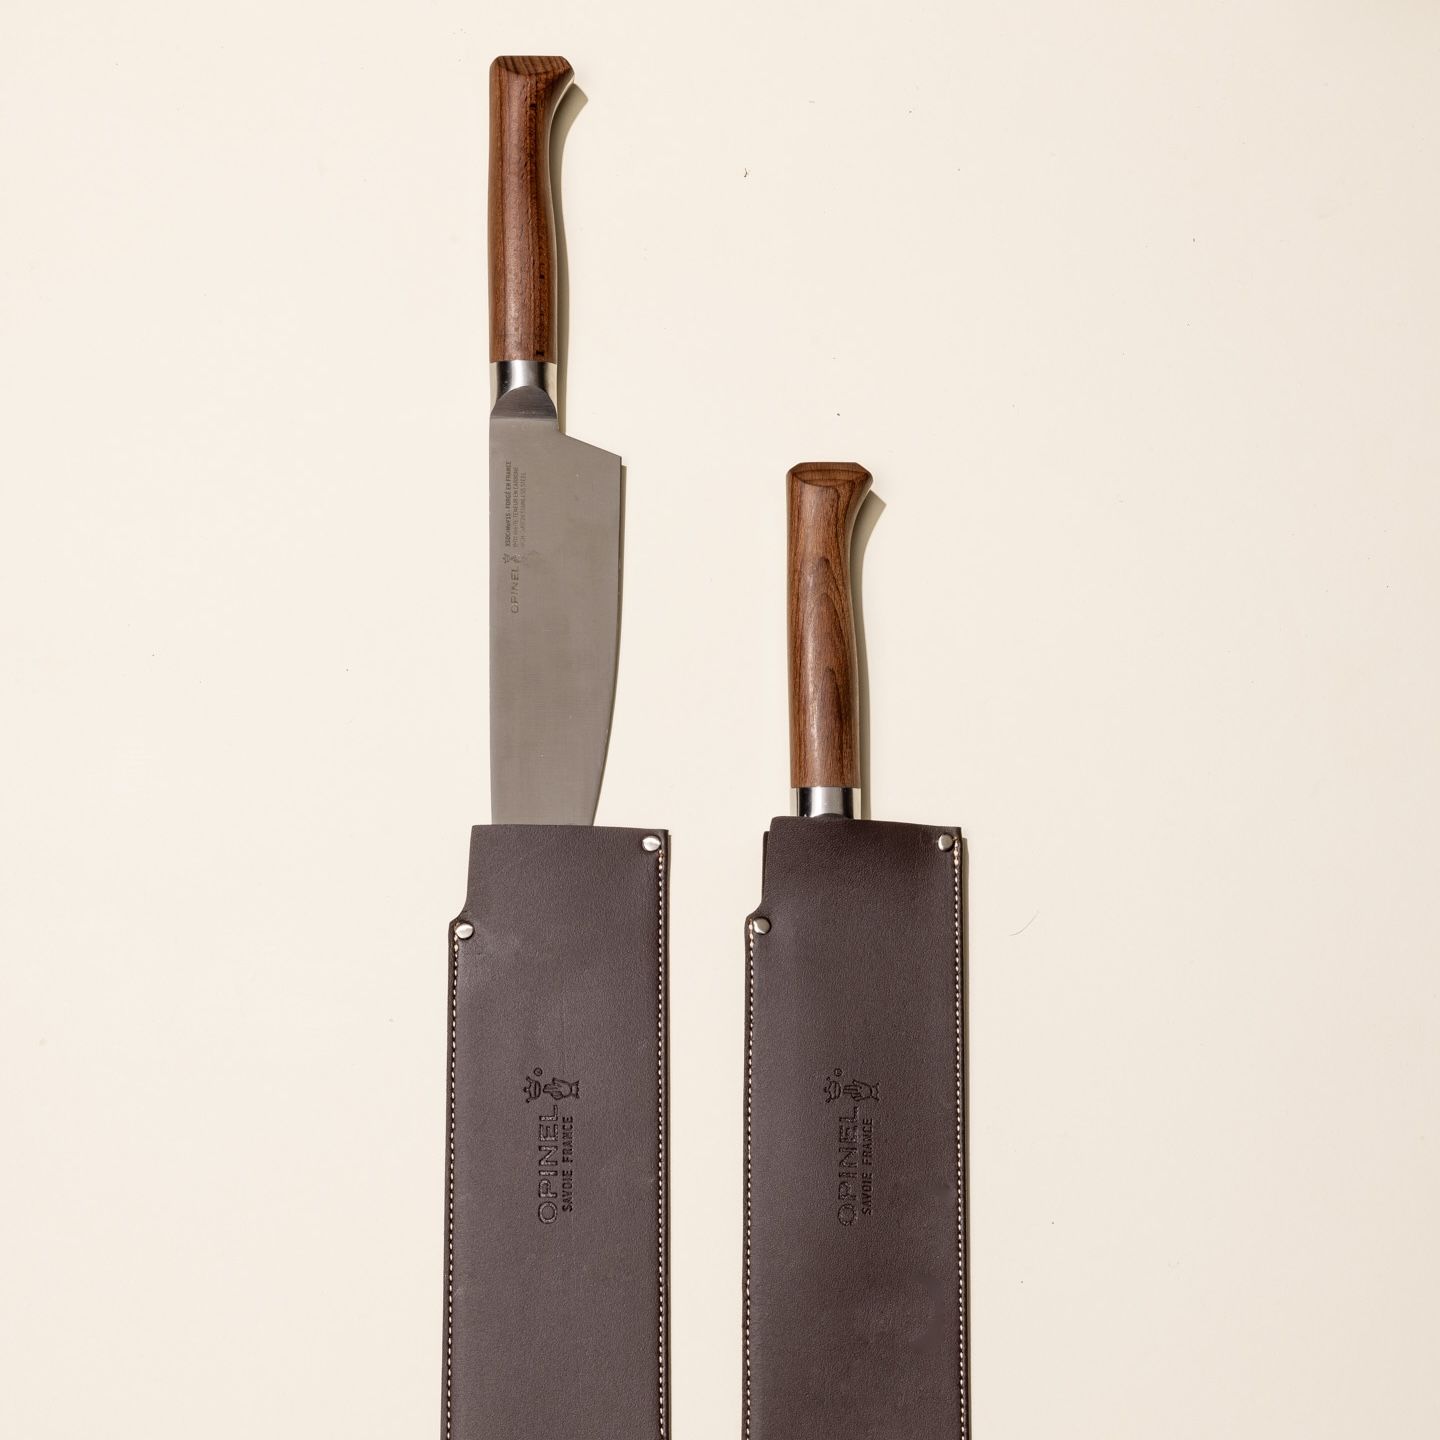 A chef's knife with a sharp steel blade and a beveled dark wood handle sits with a leather sleeve on the blade. Next to it is another knife sitting fully inside a leather sleeve.